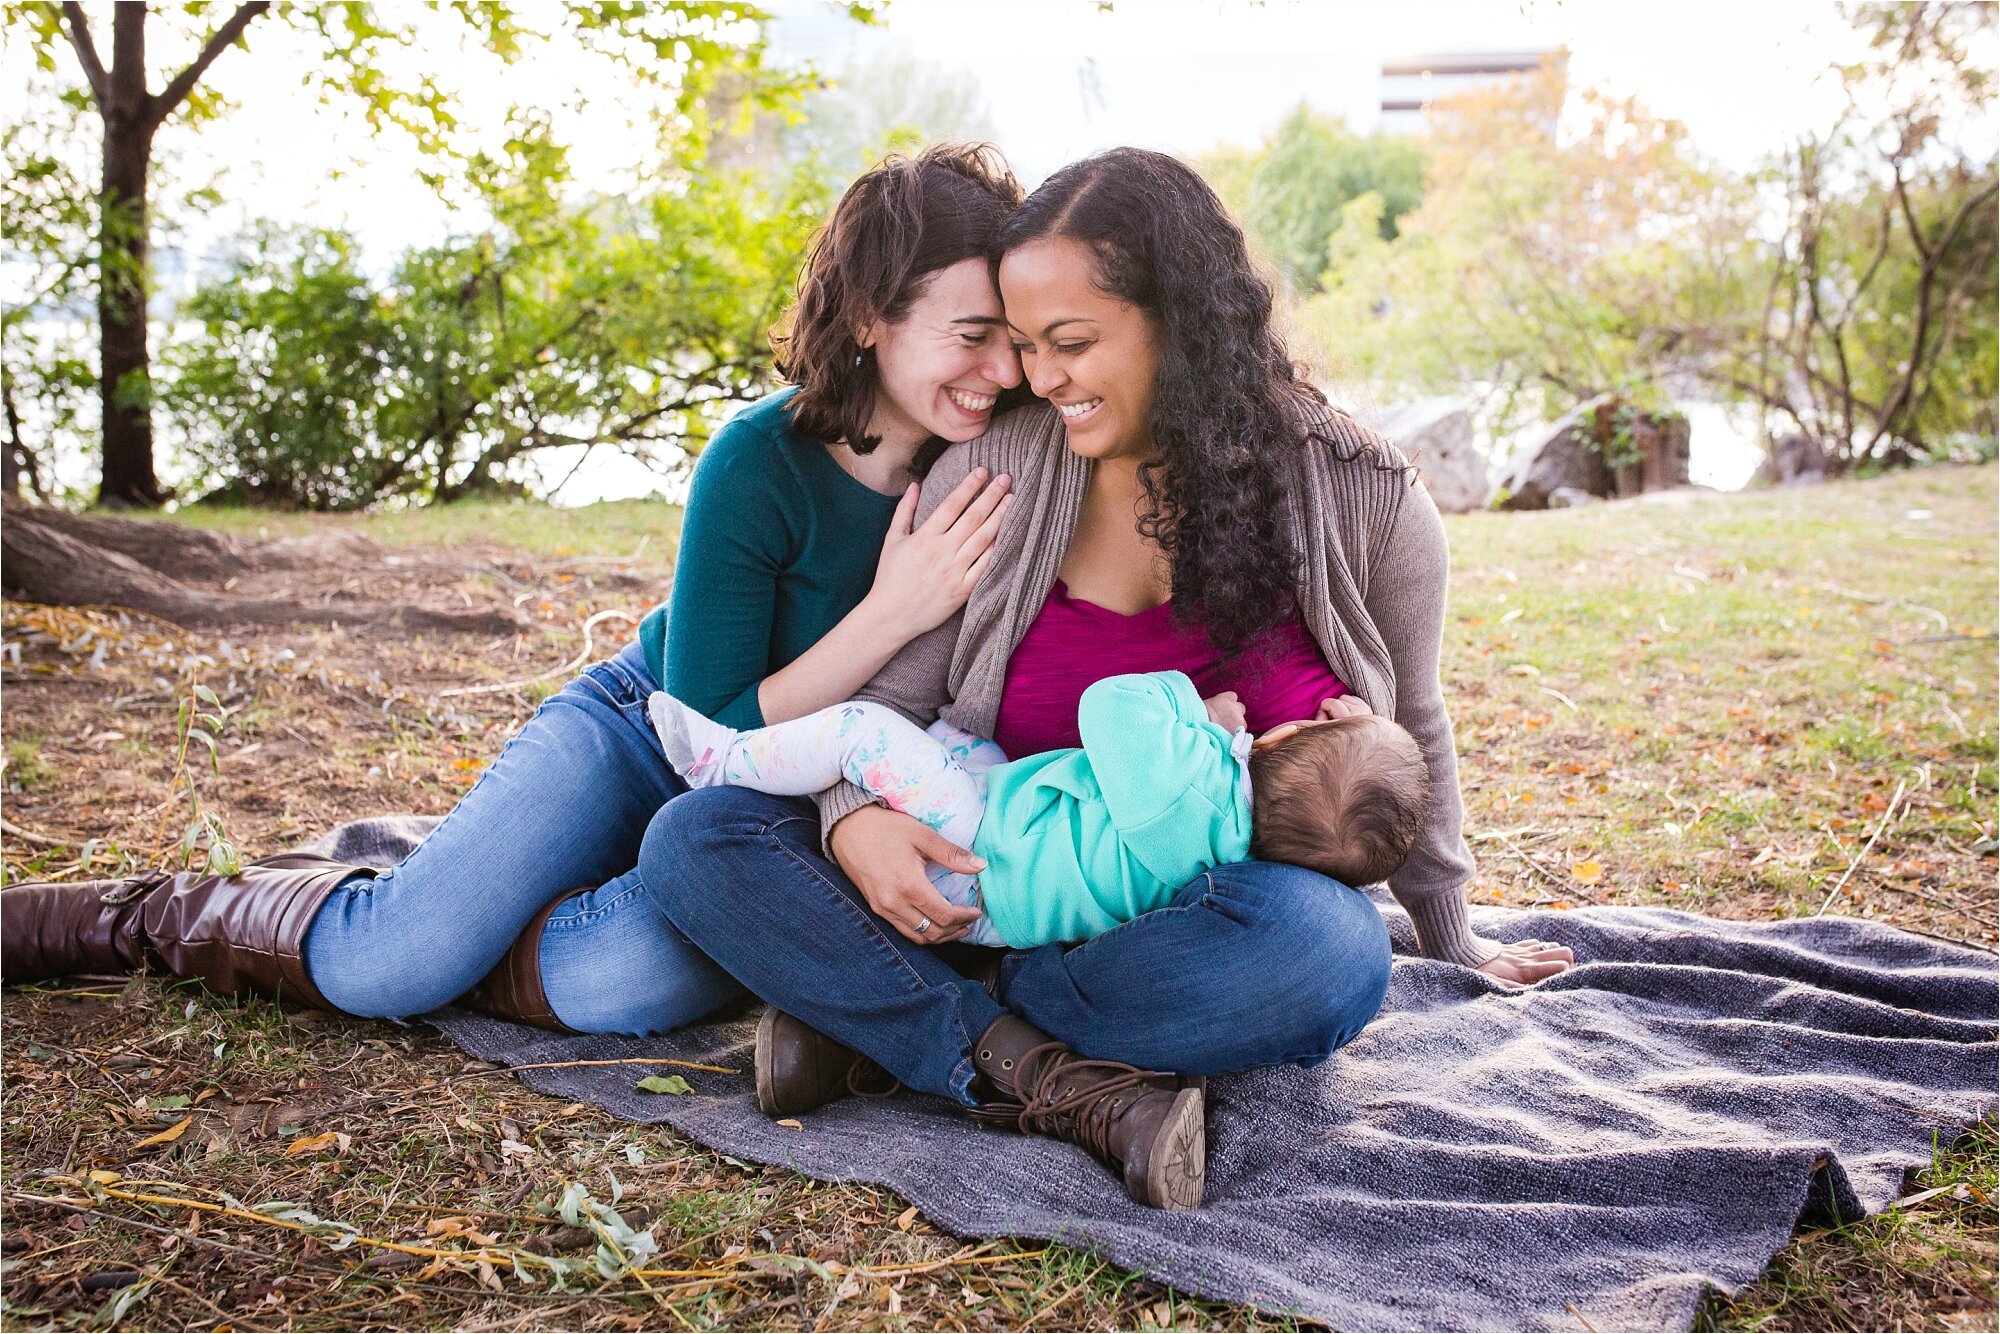 Lesbian gay mommies are sweet and laugh together while nursing their baby daughter under the willow trees by the Delaware River, Family Photography Philadelphia